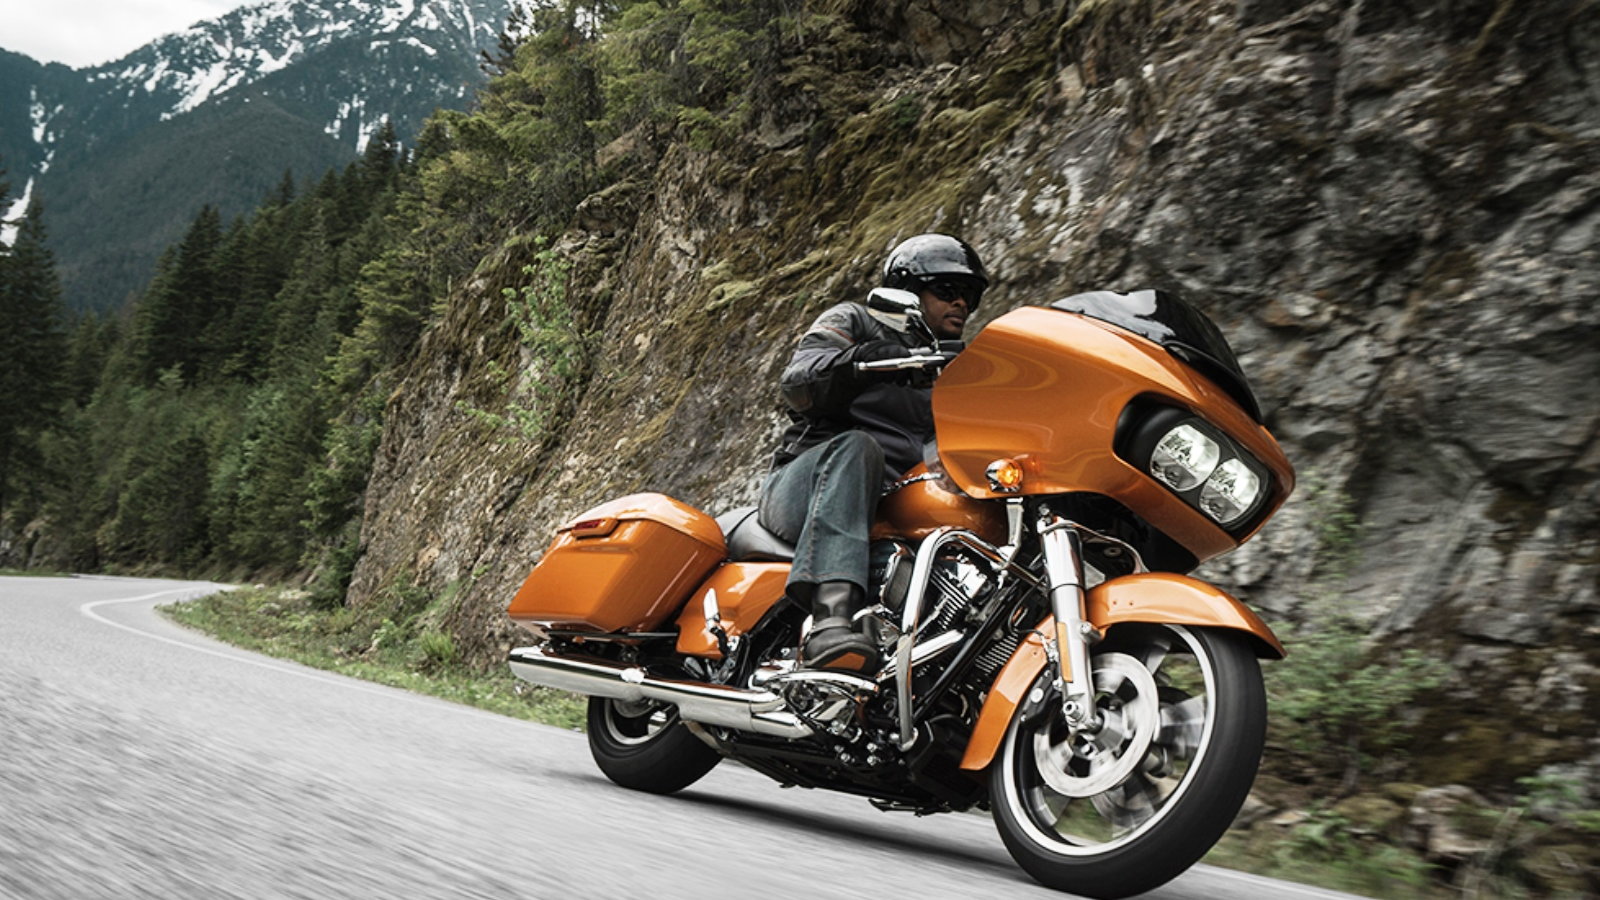 Touring Tips With the 2022 HarleyDavidson Road Glide Special